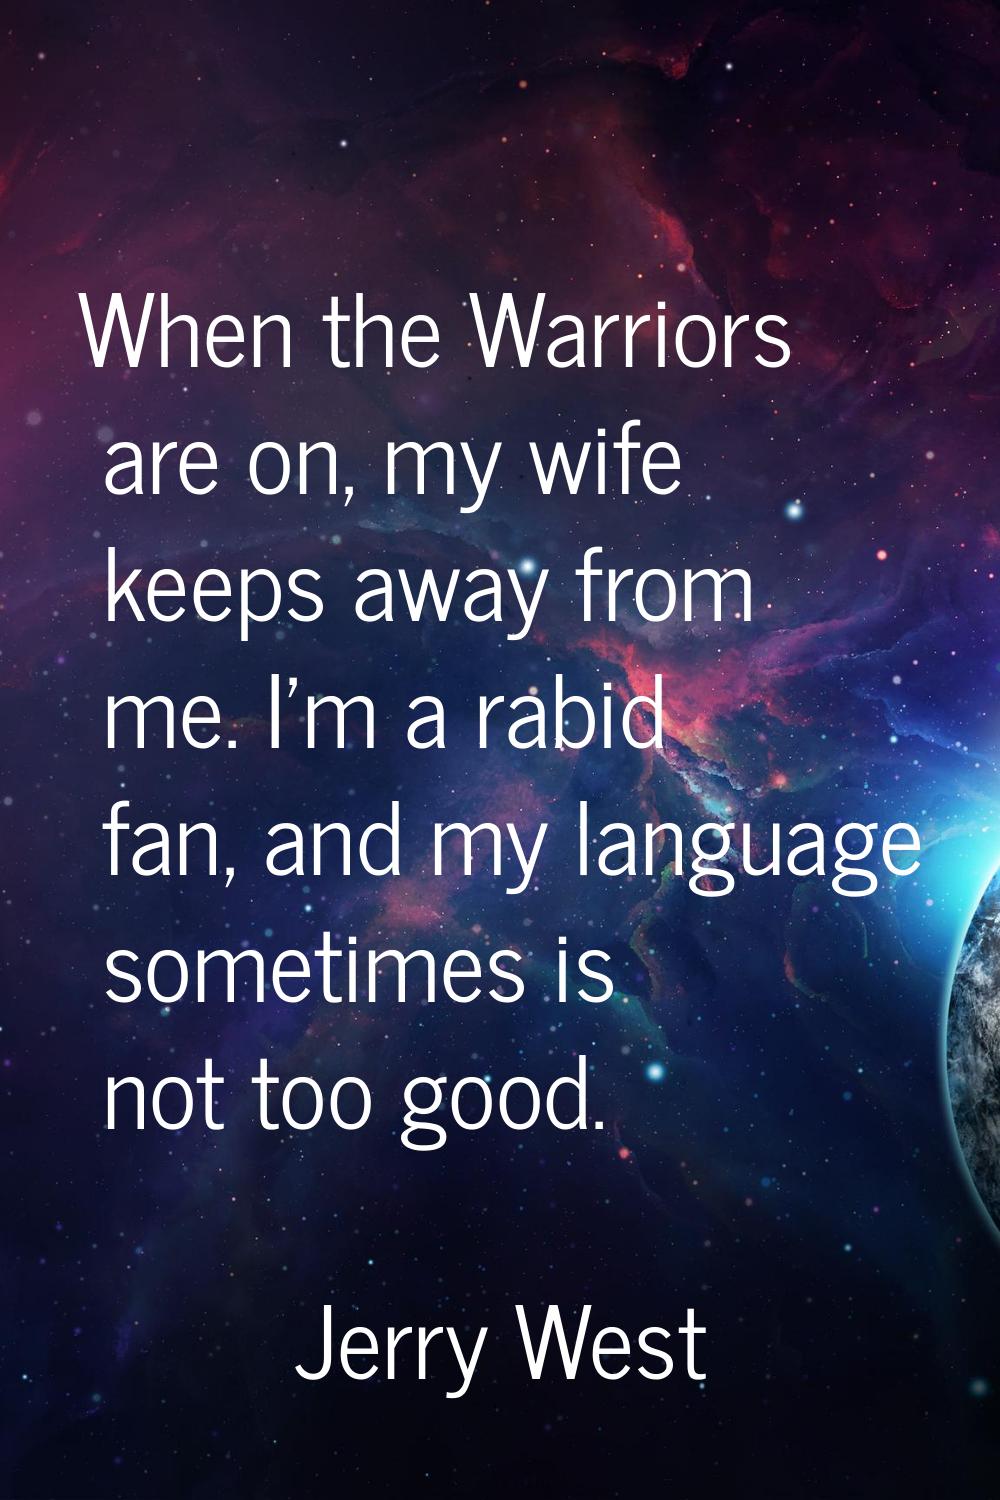 When the Warriors are on, my wife keeps away from me. I'm a rabid fan, and my language sometimes is